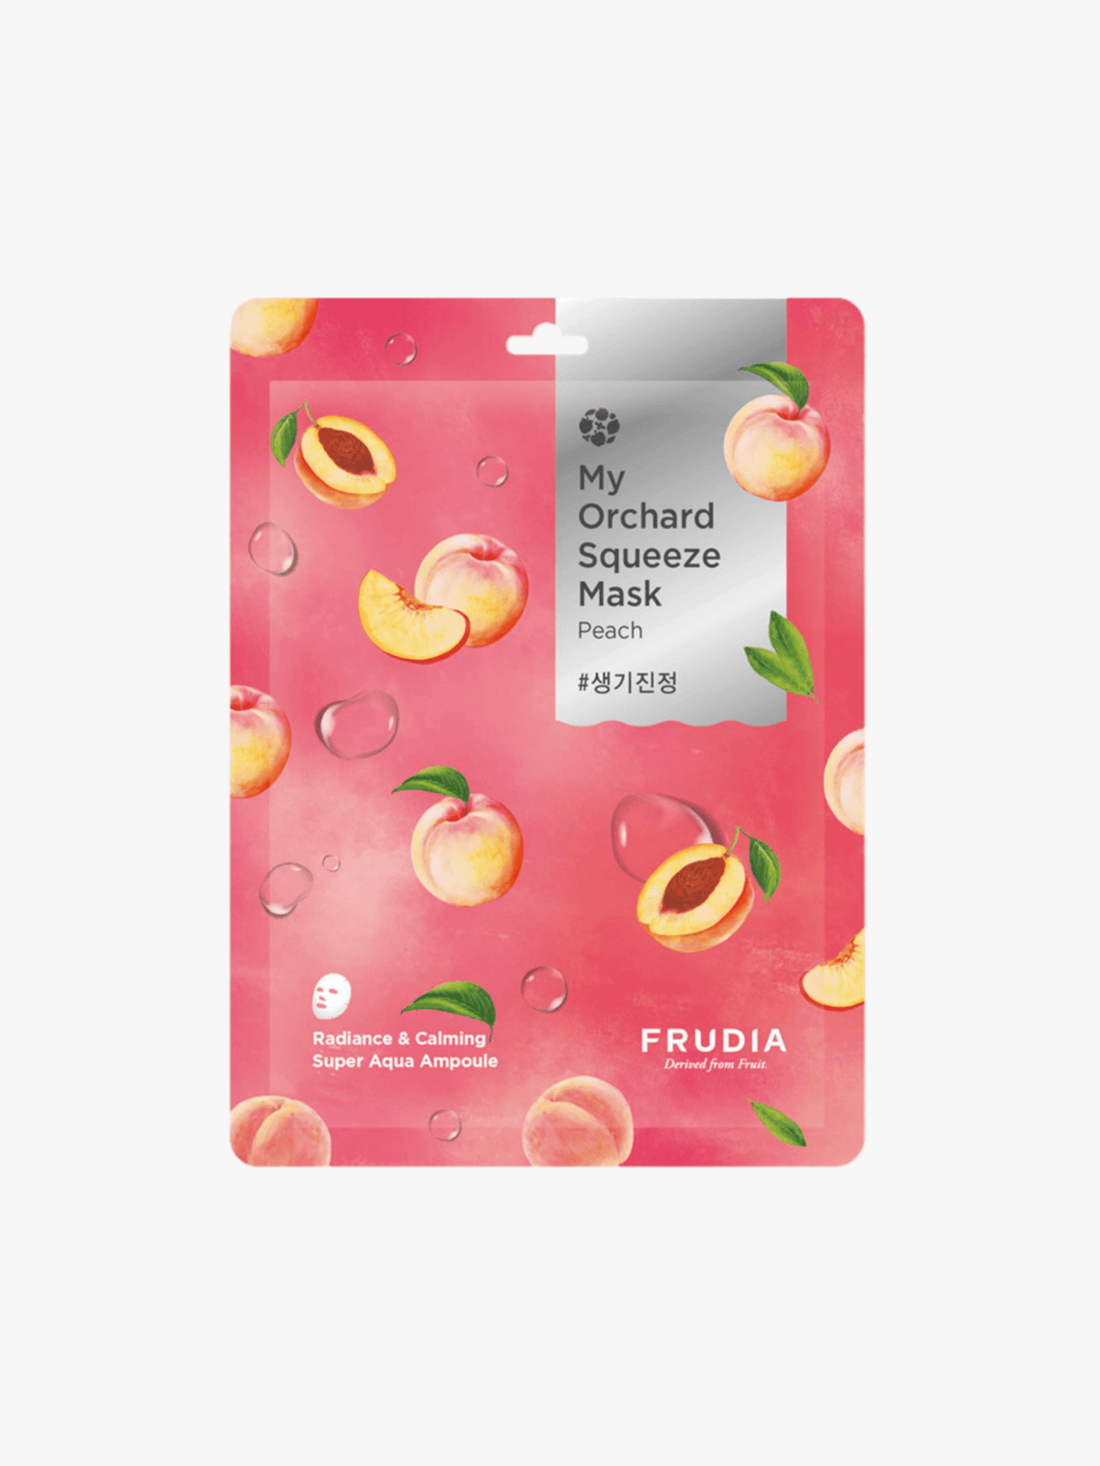 FRUDIA - Mask - My Orchard Squeeze Mask Peach